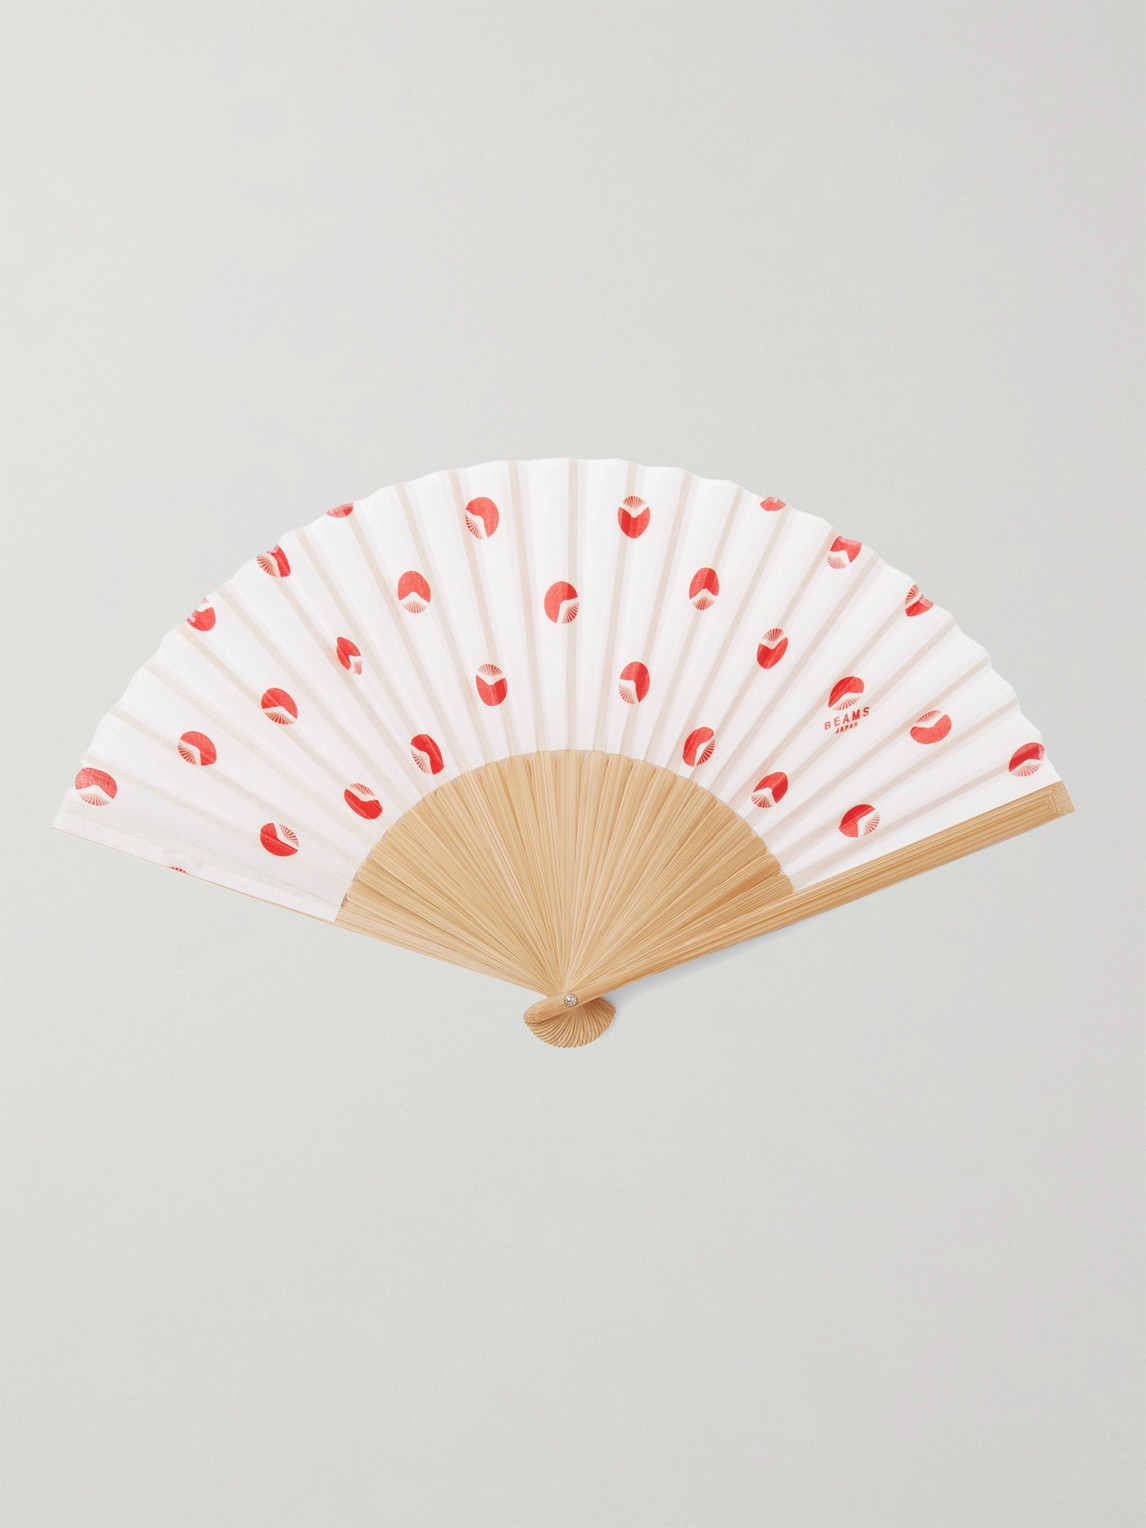 By Japan Beams Japan 3.14 Printed Cloth And Wood Fan In White